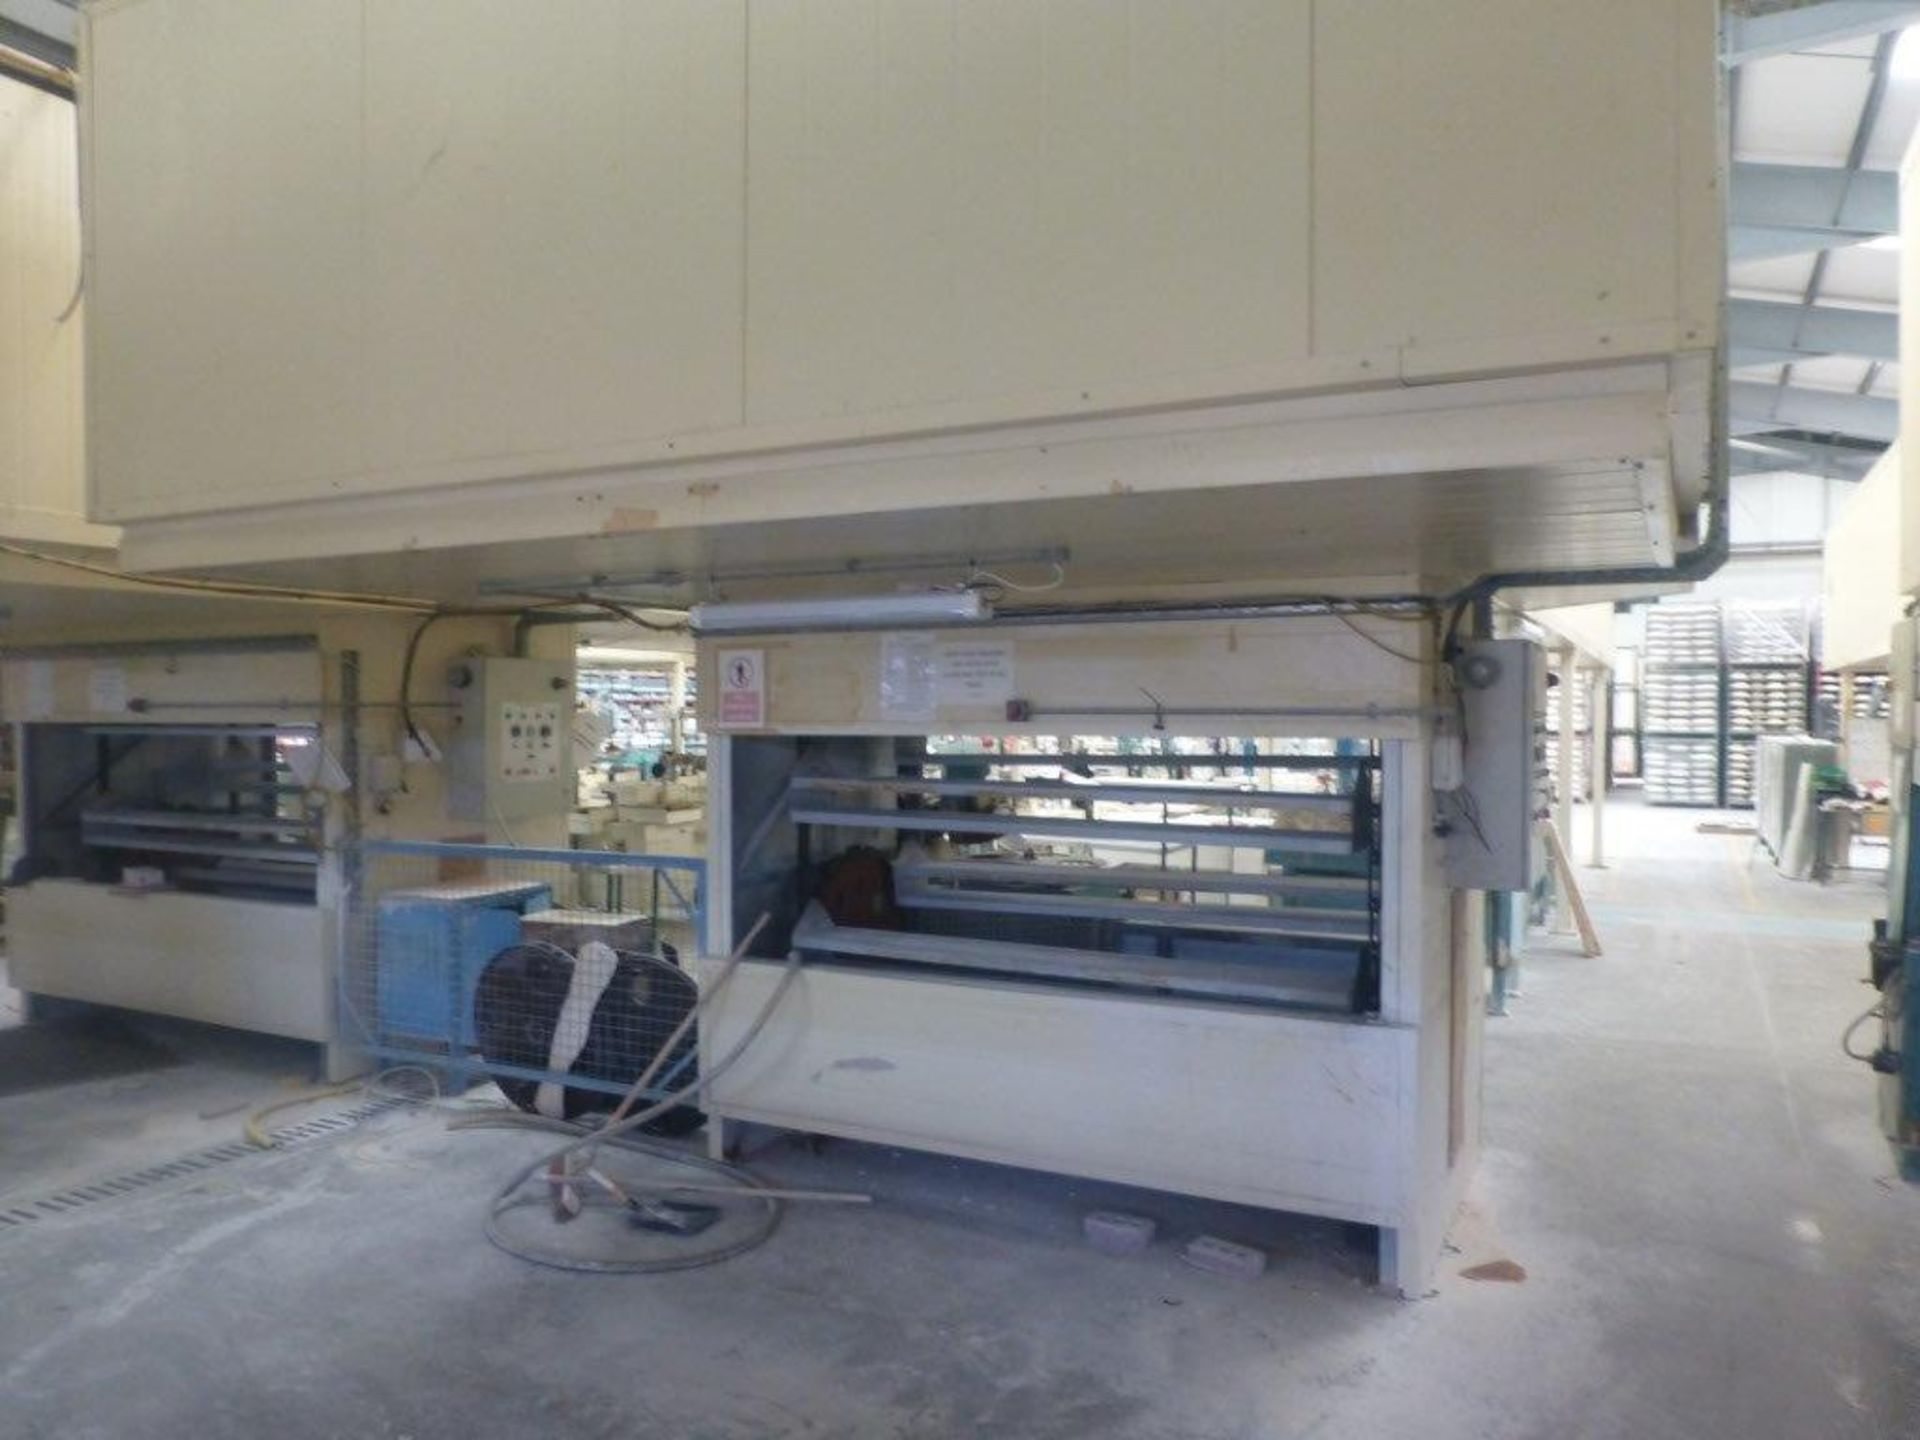 Global Drying Systems 51 shelf up and over gas fired dryer, Plant No UOD13, shelf width 2.1m, - Image 4 of 5